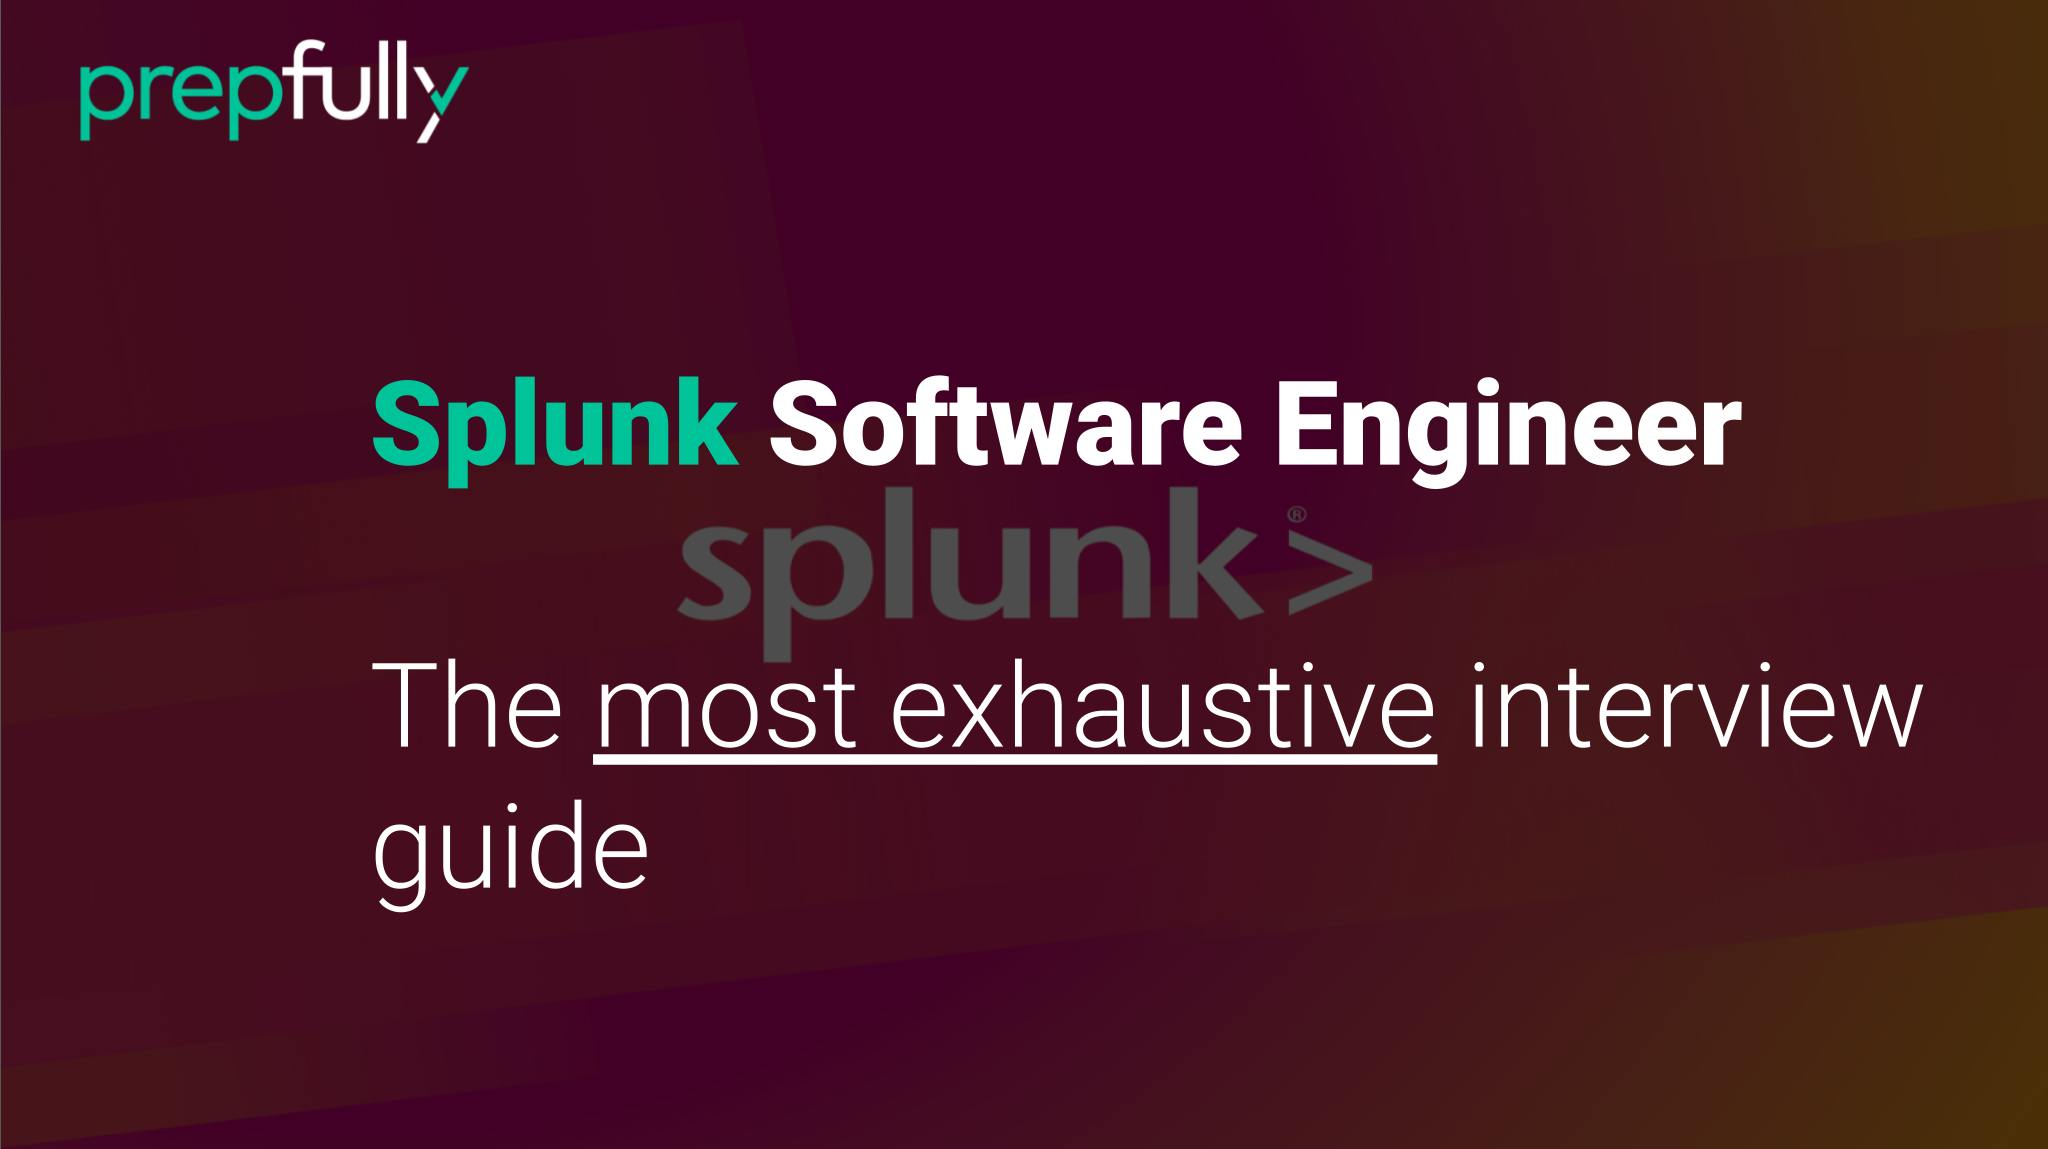 Interview guide for Splunk Software Engineer